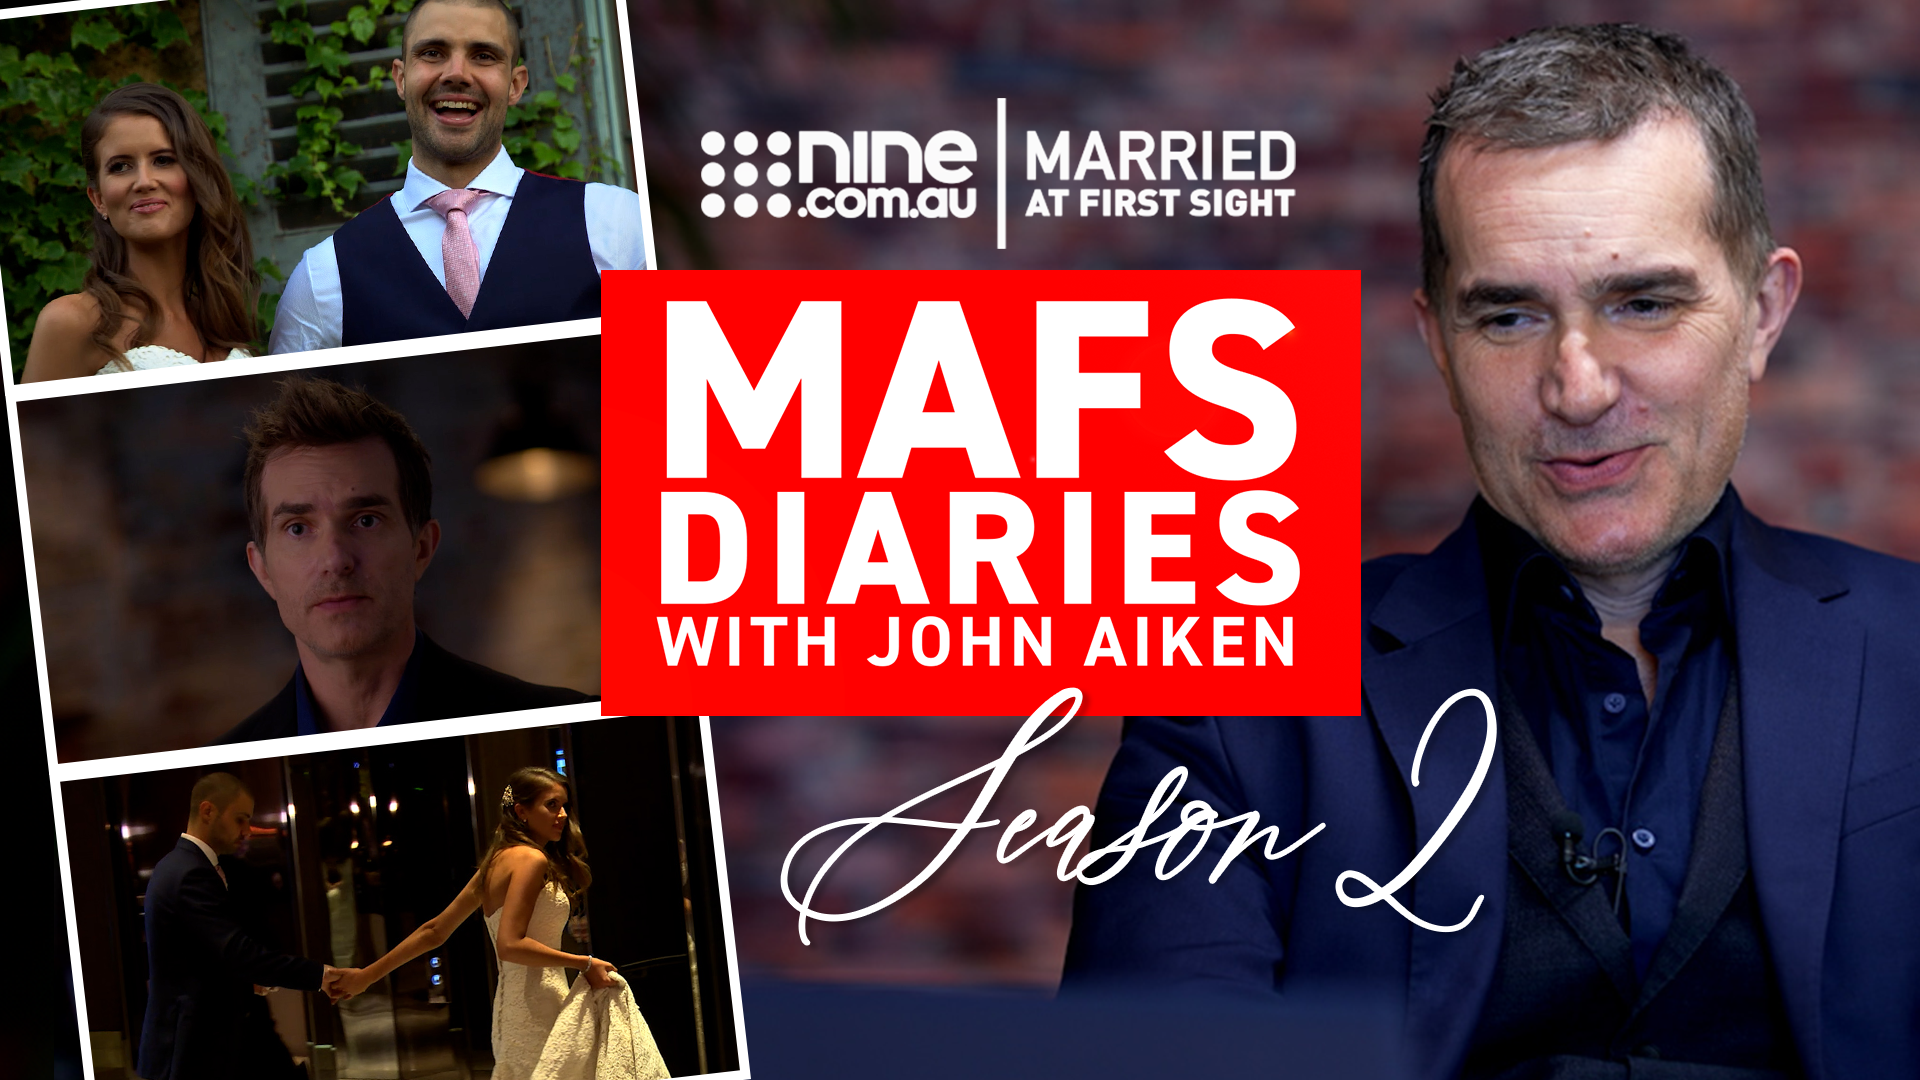 The MAFS Diaries with John Aiken Episode 2: Expert revisits Erin and Bryce's love story 